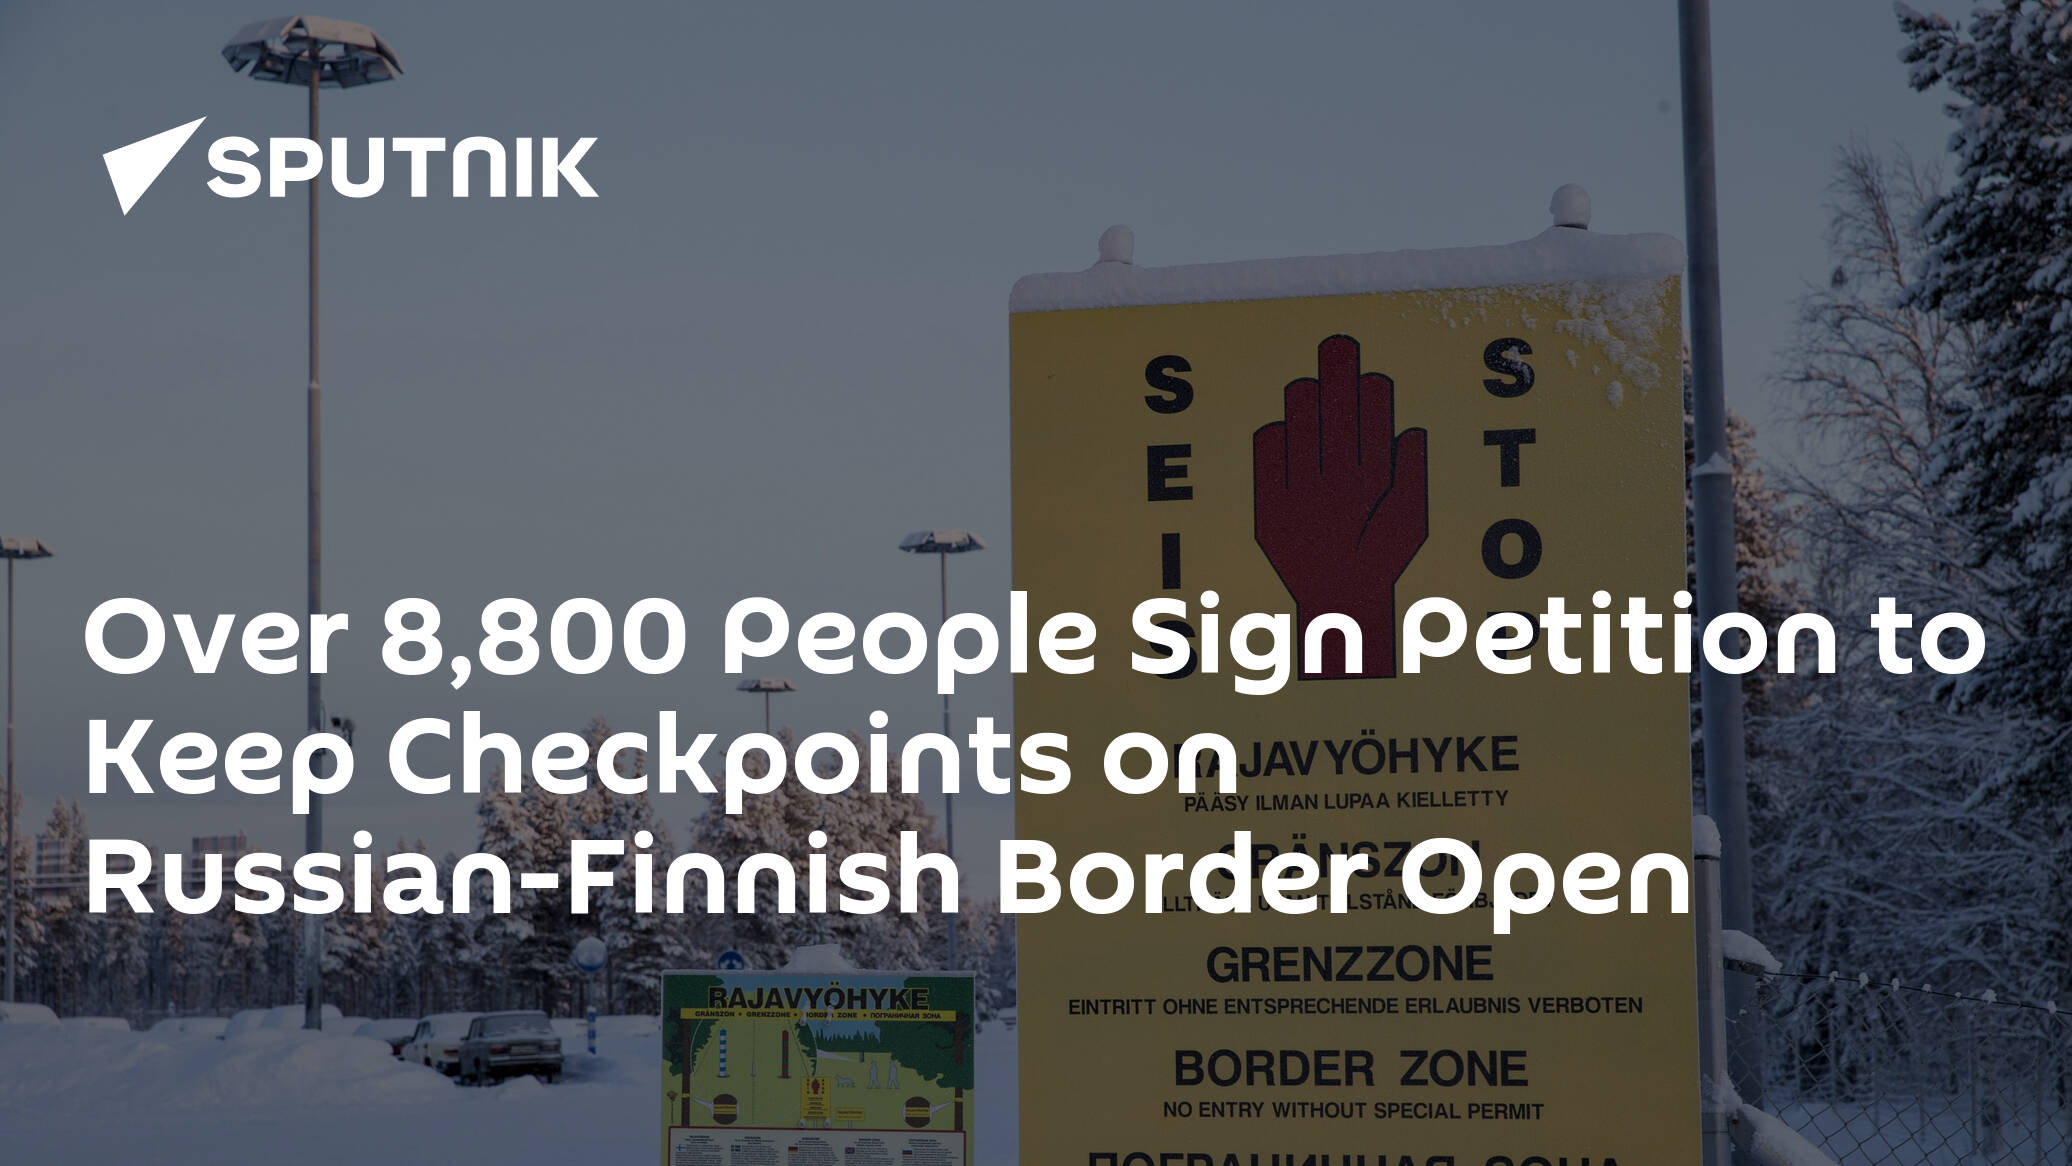 Over 8,800 People Sign Petition to Keep Checkpoints on Russian-Finnish Border Open